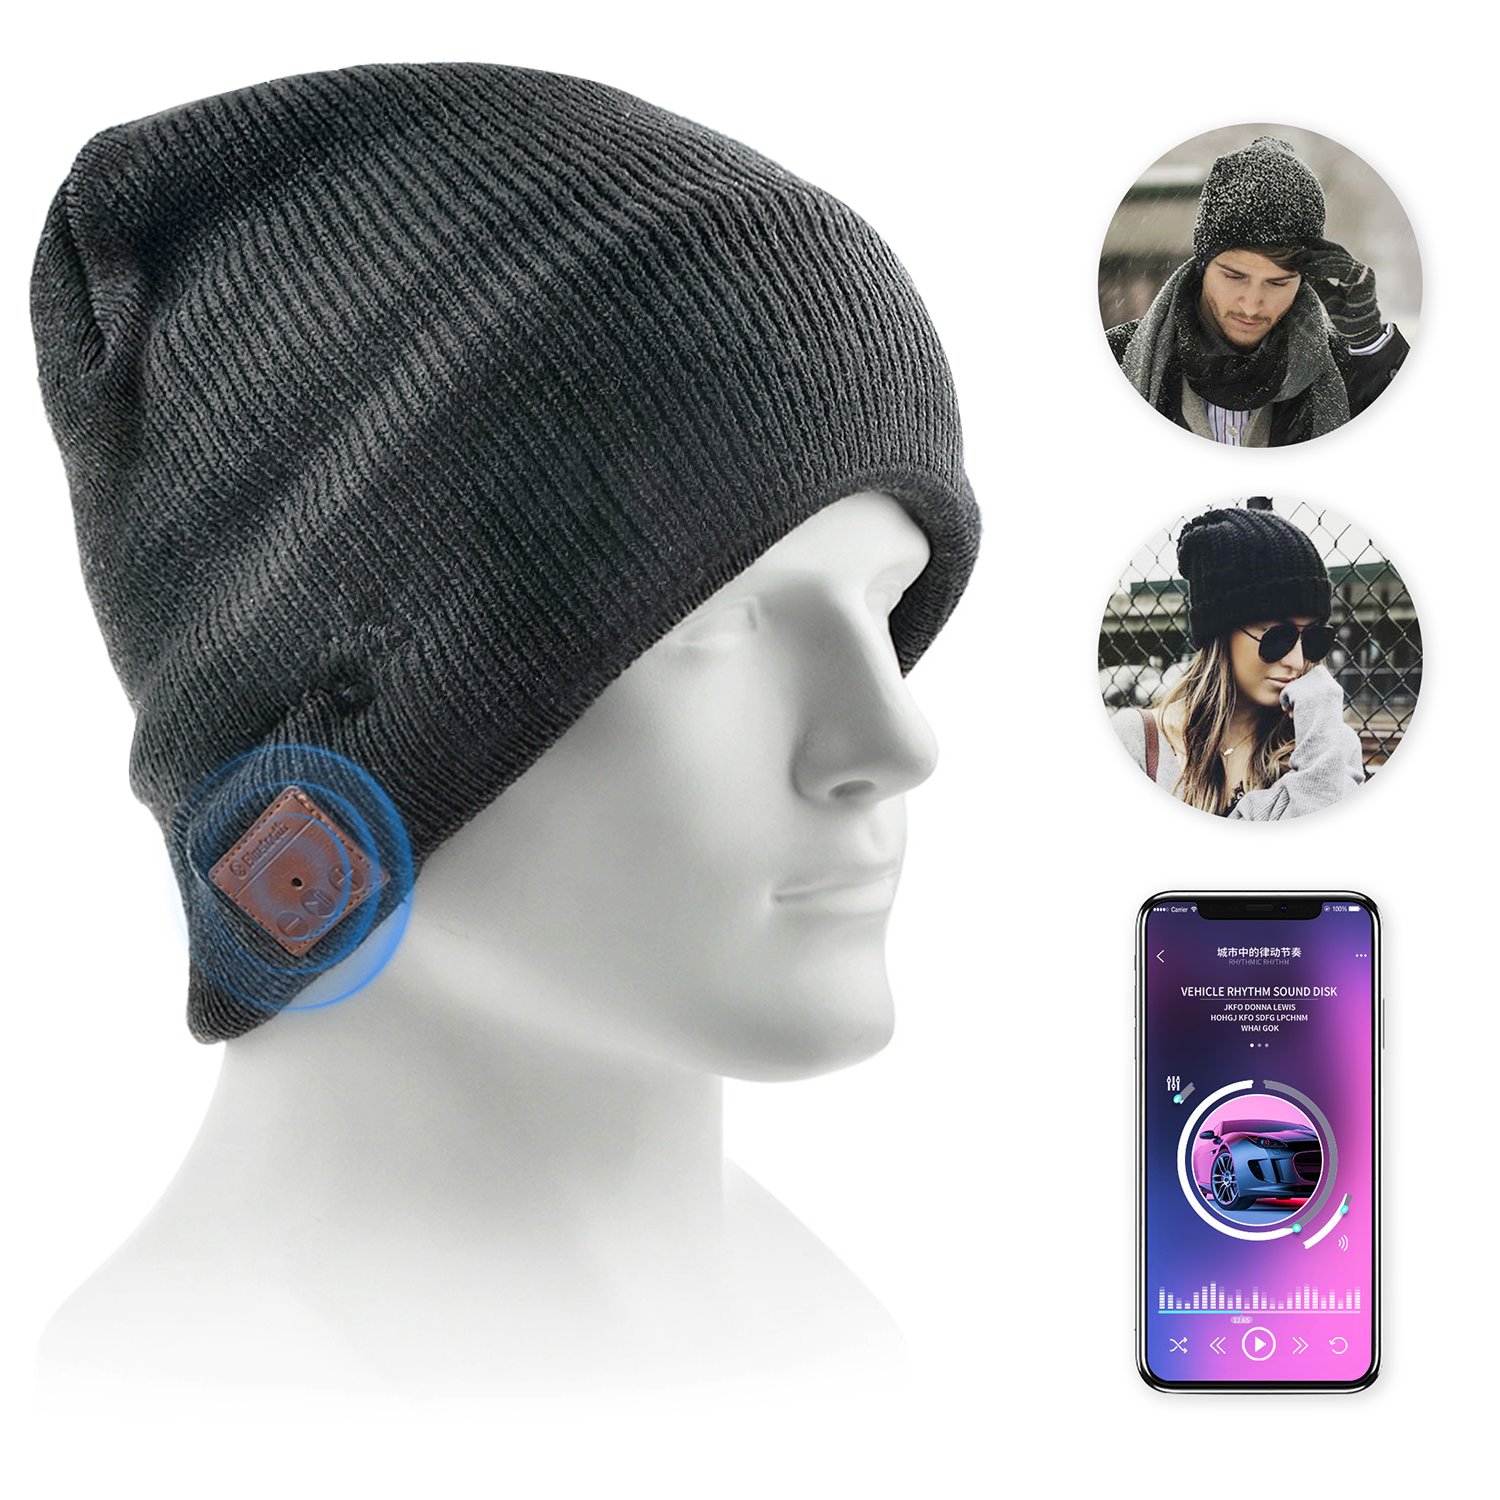 Bluetooth Beanie Hat, Flashmen Upgraded Wireless Bluetooth 5.0 Beanie Hat with Headphones Headset Earphone Knitted Beanie with Stereo Speakers and Mic for Women Men - image 1 of 9